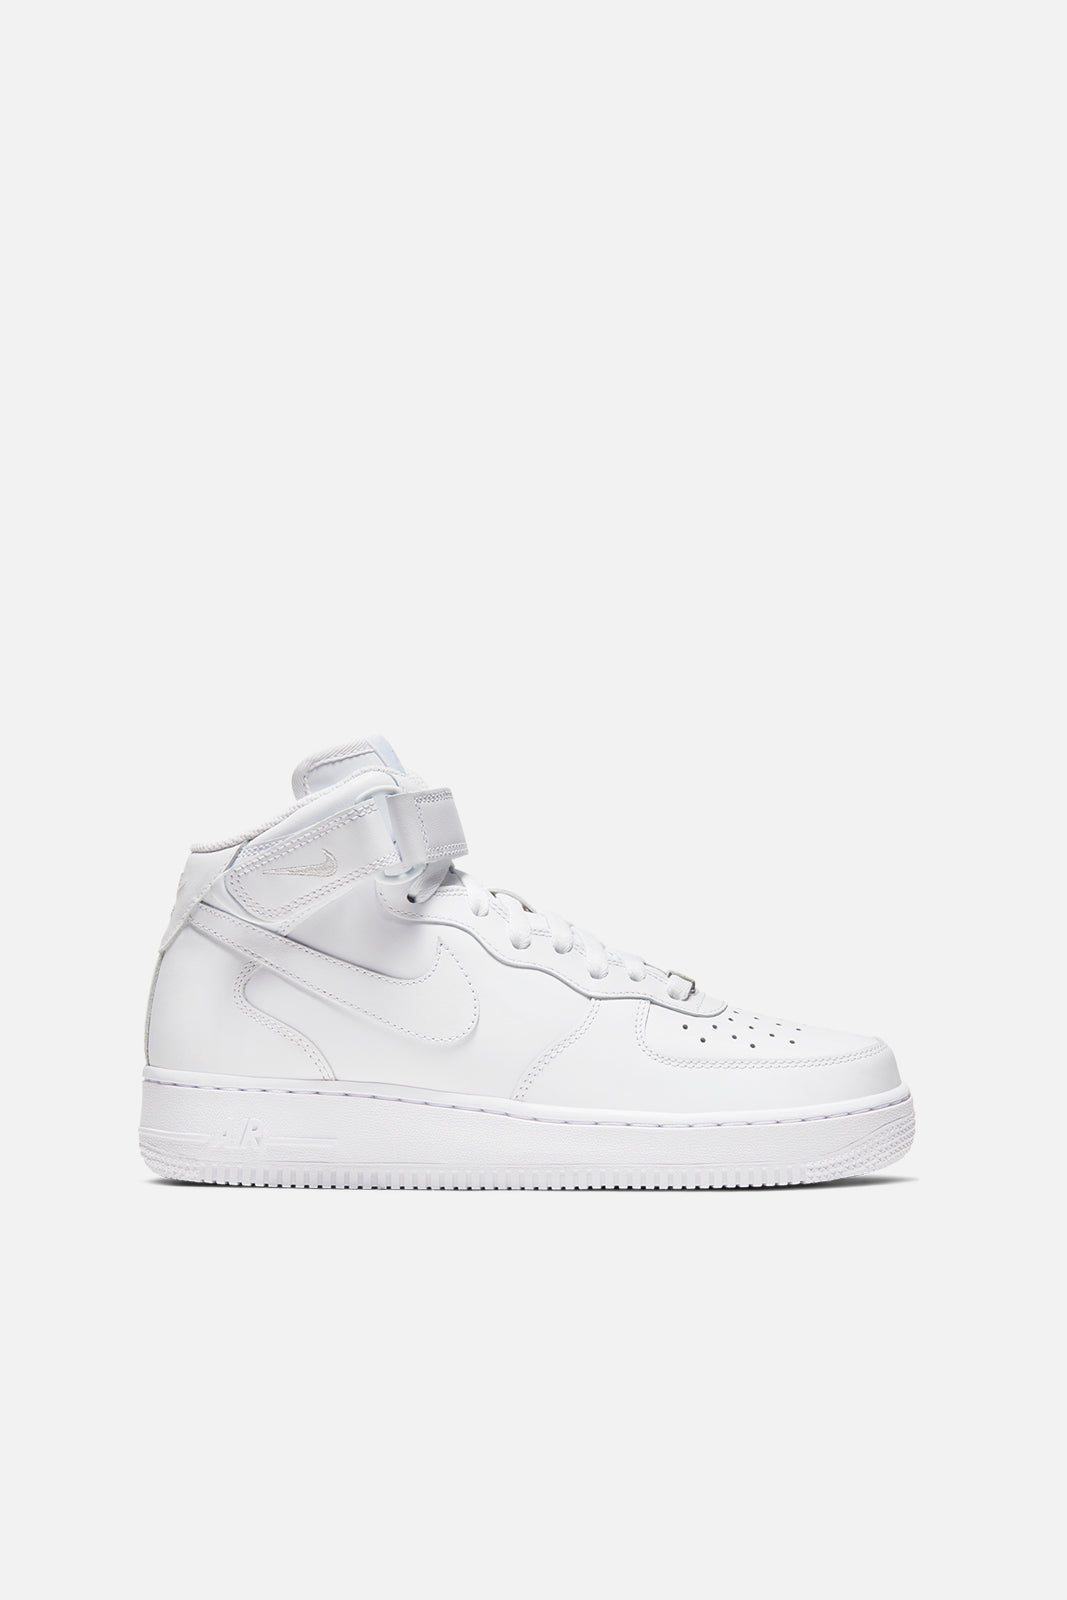 Nike Wmns Air Force 1 07 Mid White - Size 8 Women